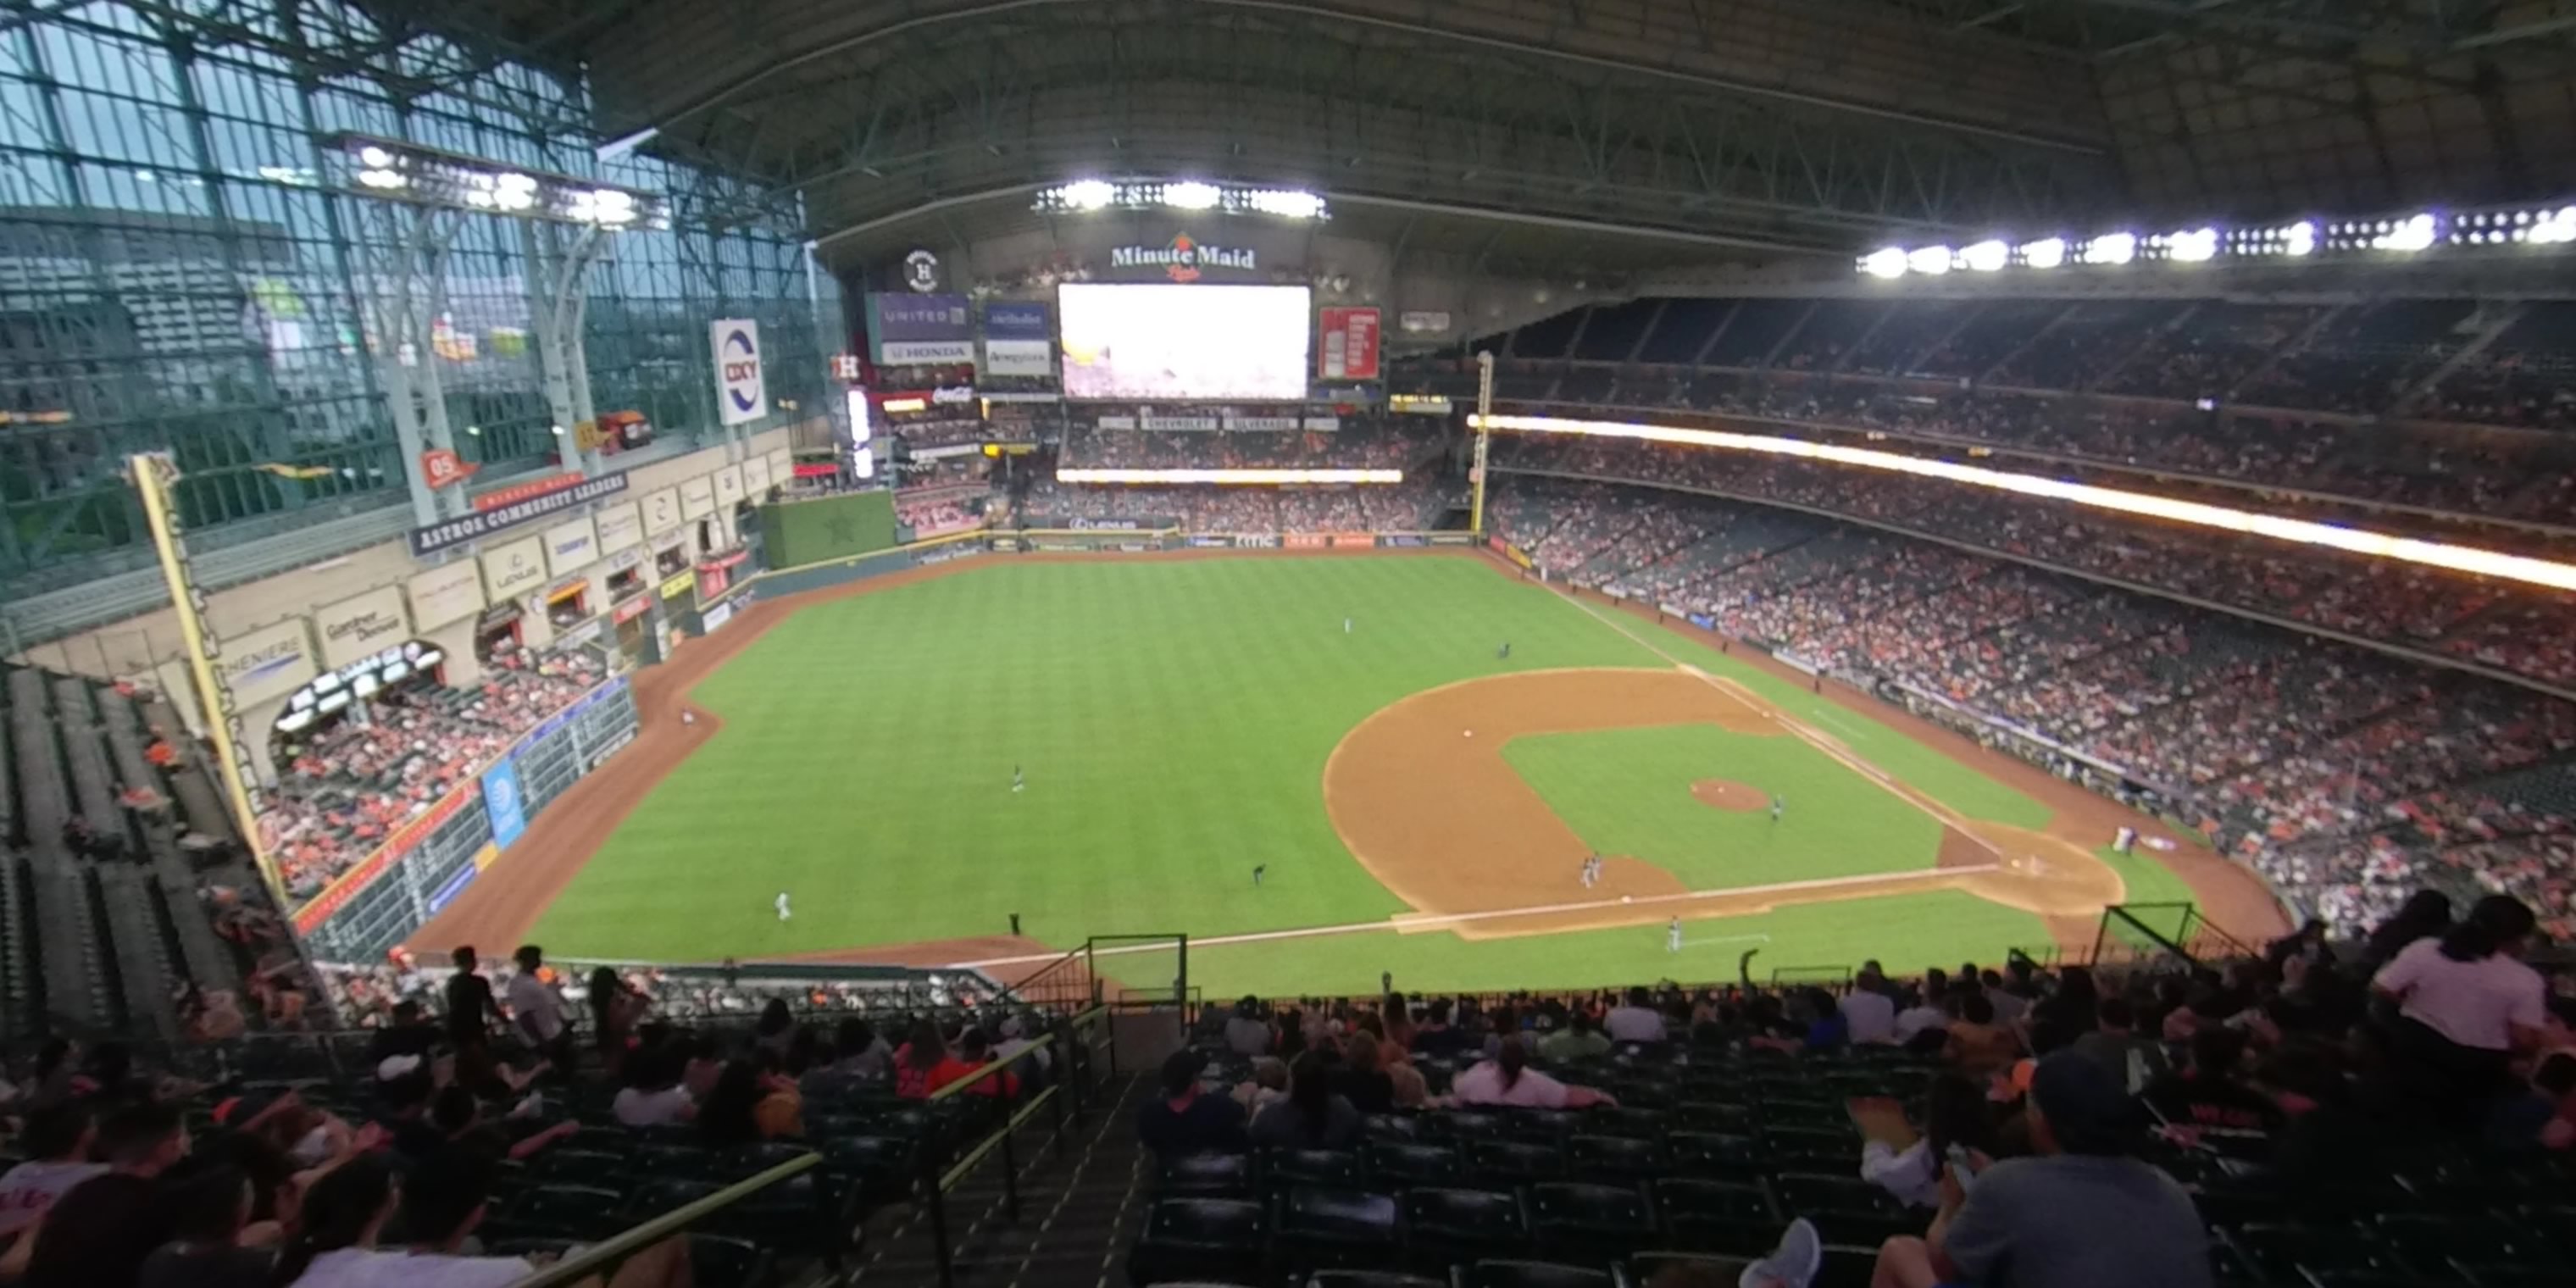 section 409 panoramic seat view  for baseball - minute maid park